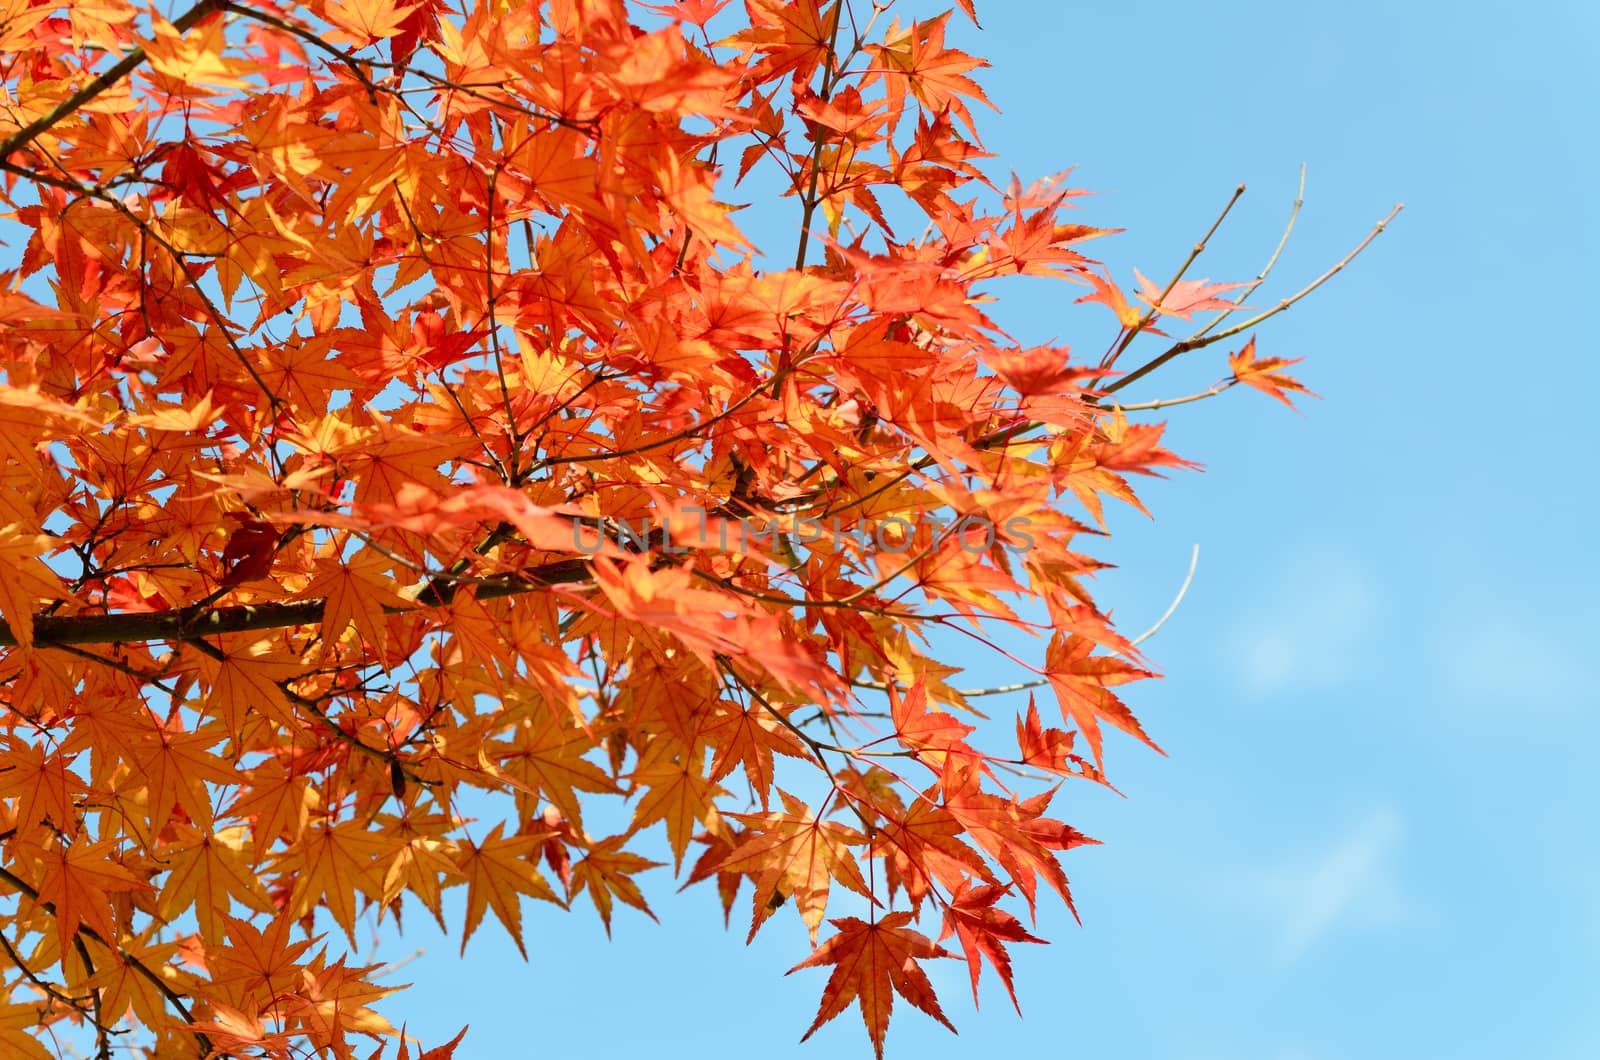 Red maple leaves in autumn by hatoriz